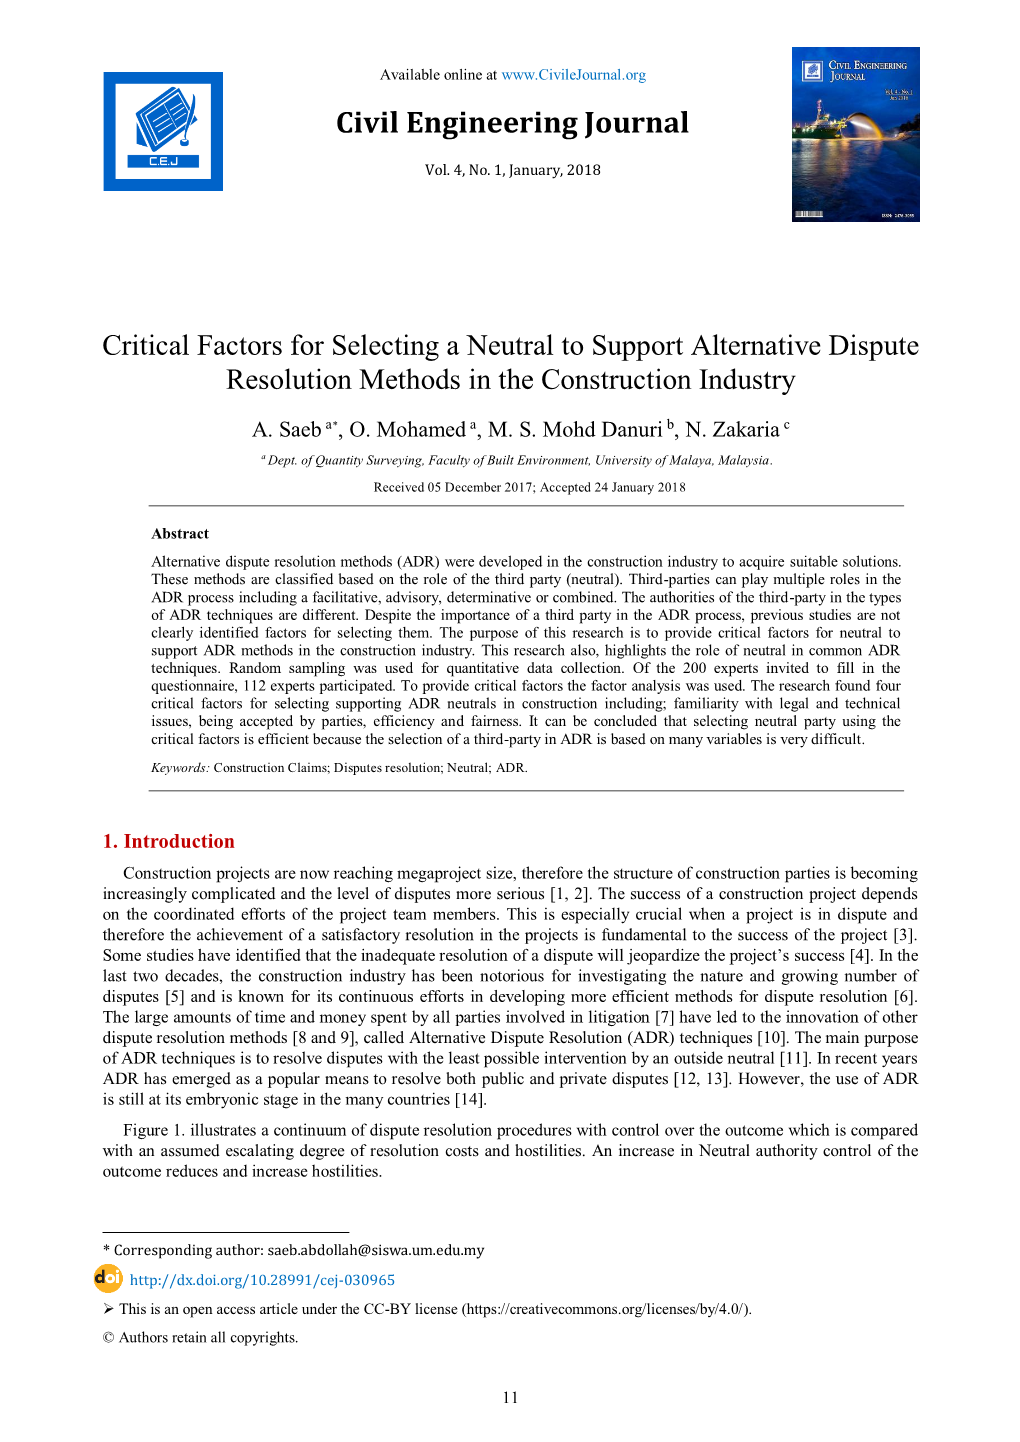 Critical Factors for Selecting a Neutral to Support Alternative Dispute Resolution Methods in the Construction Industry